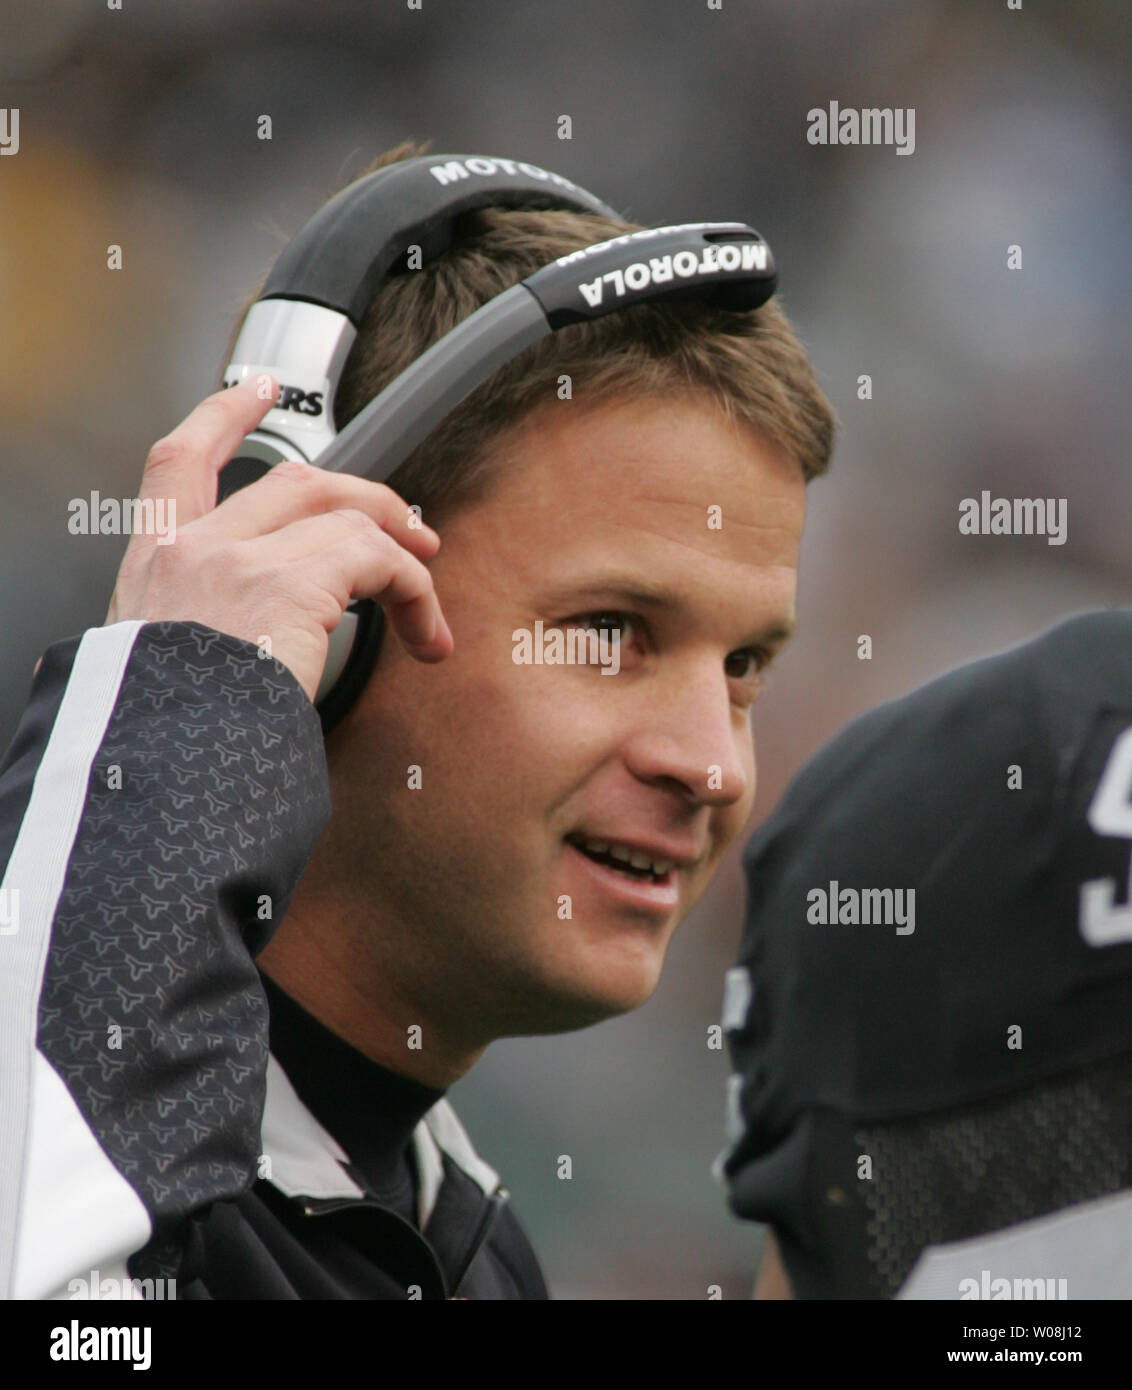 Oakland Raiders head coach Lane Kiffin talks with a player during play against  the Indianapolis Colts at Oracle Coliseum in Oakland, California on December 16, 2007.  The Colts defeated the Raiders 21-14.  (UPI Photo/Terry Schmitt) Stock Photo